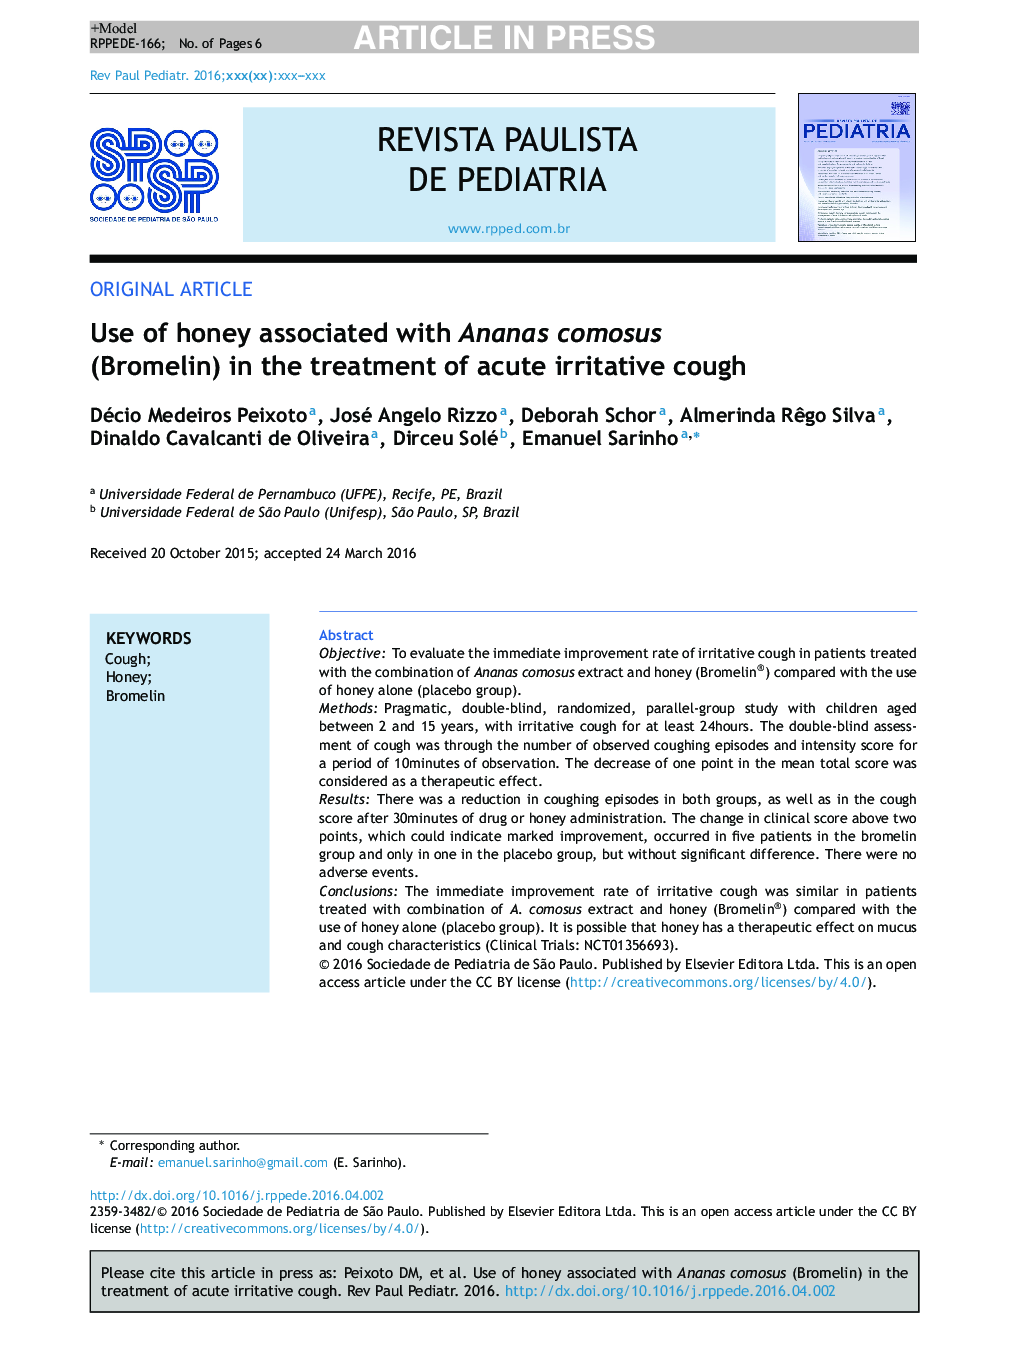 Use of honey associated with Ananas comosus (Bromelin) in the treatment of acute irritative cough